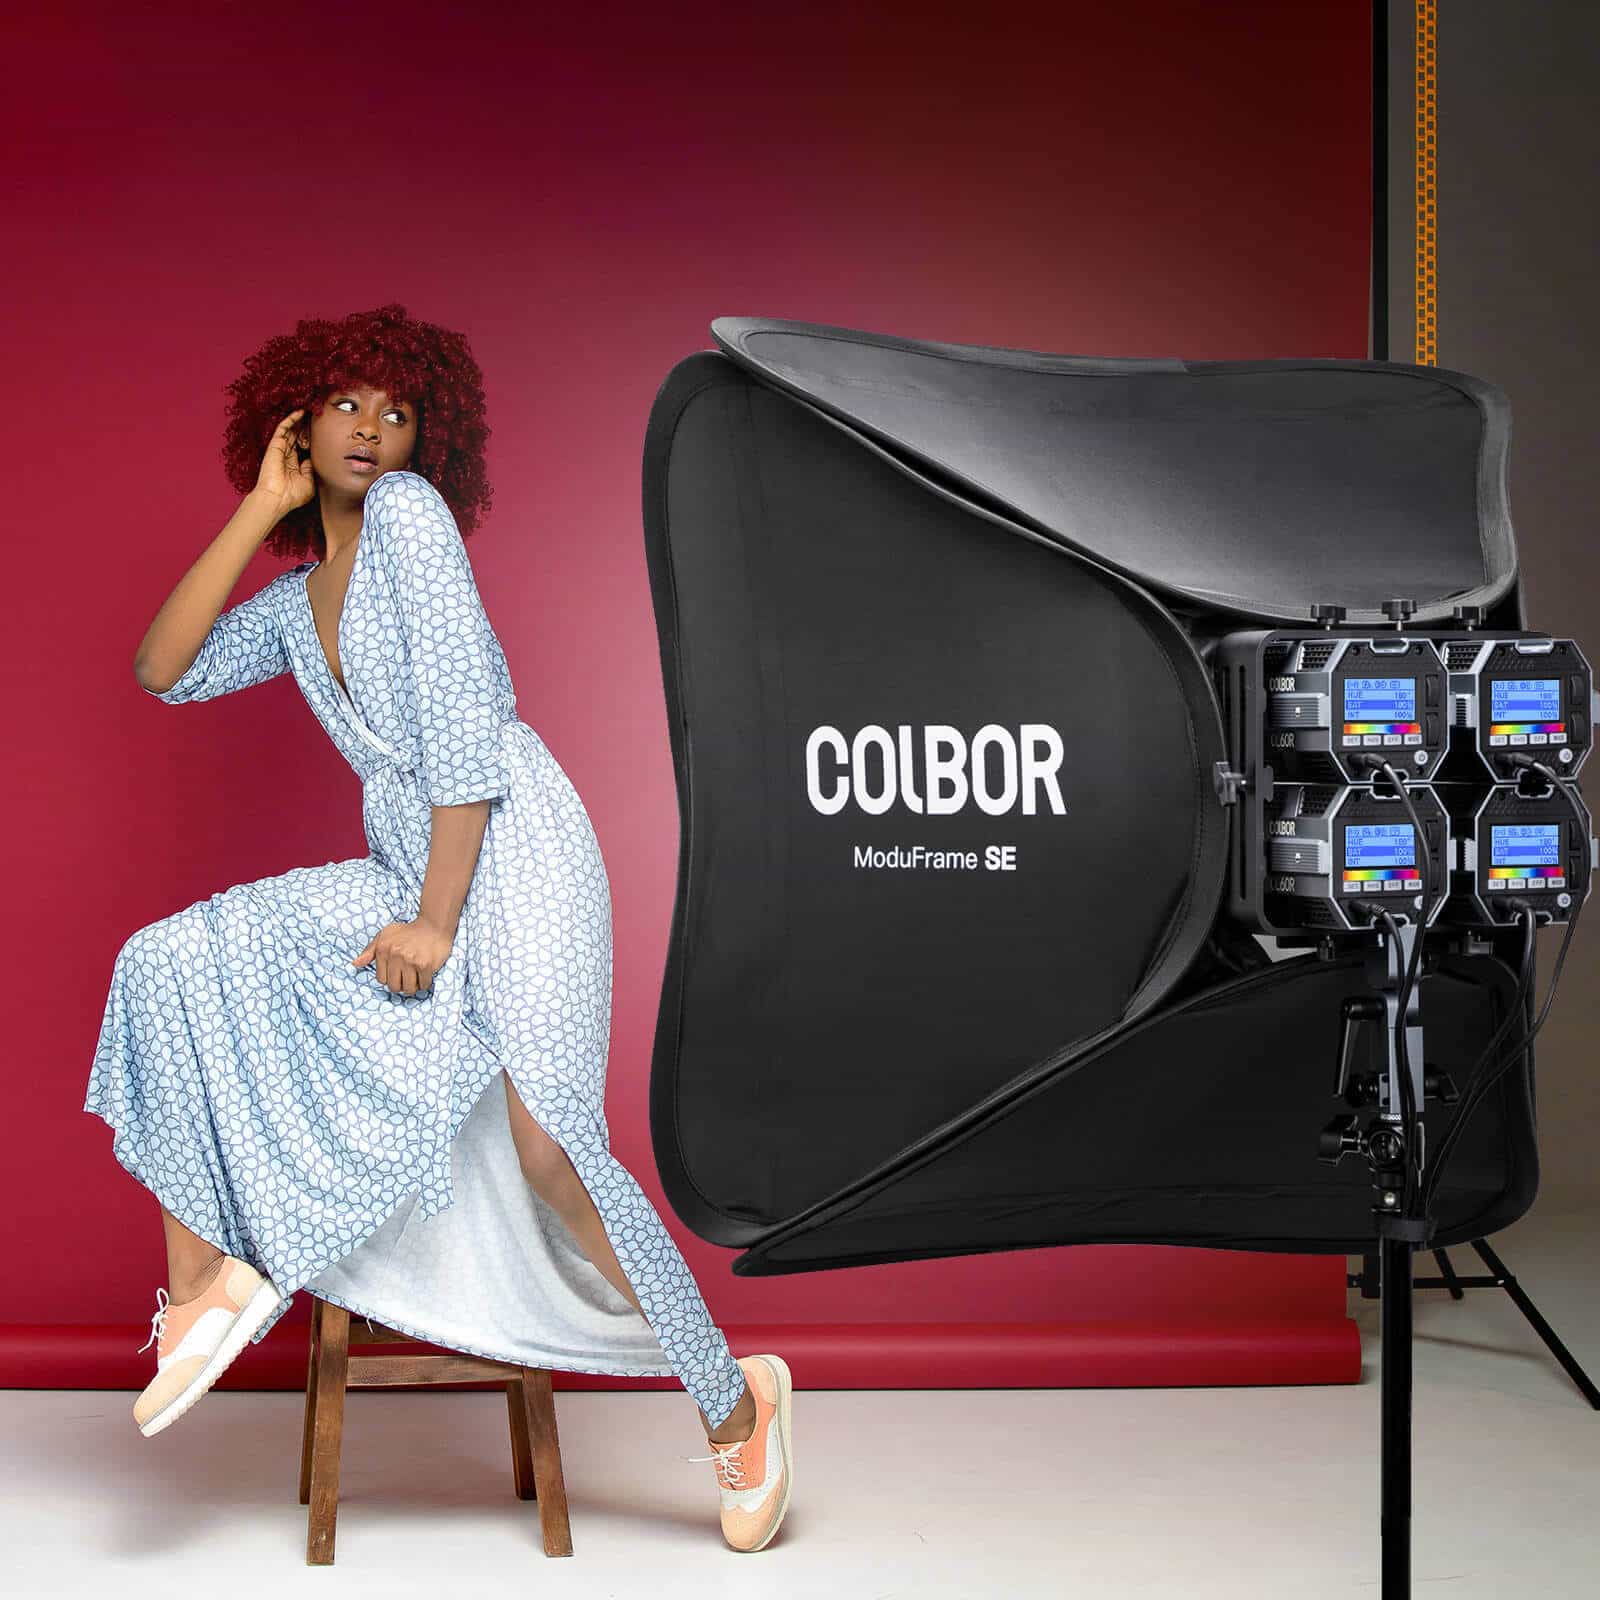 COLBOR ModuFrame SE can soften lighting for portrait photography.